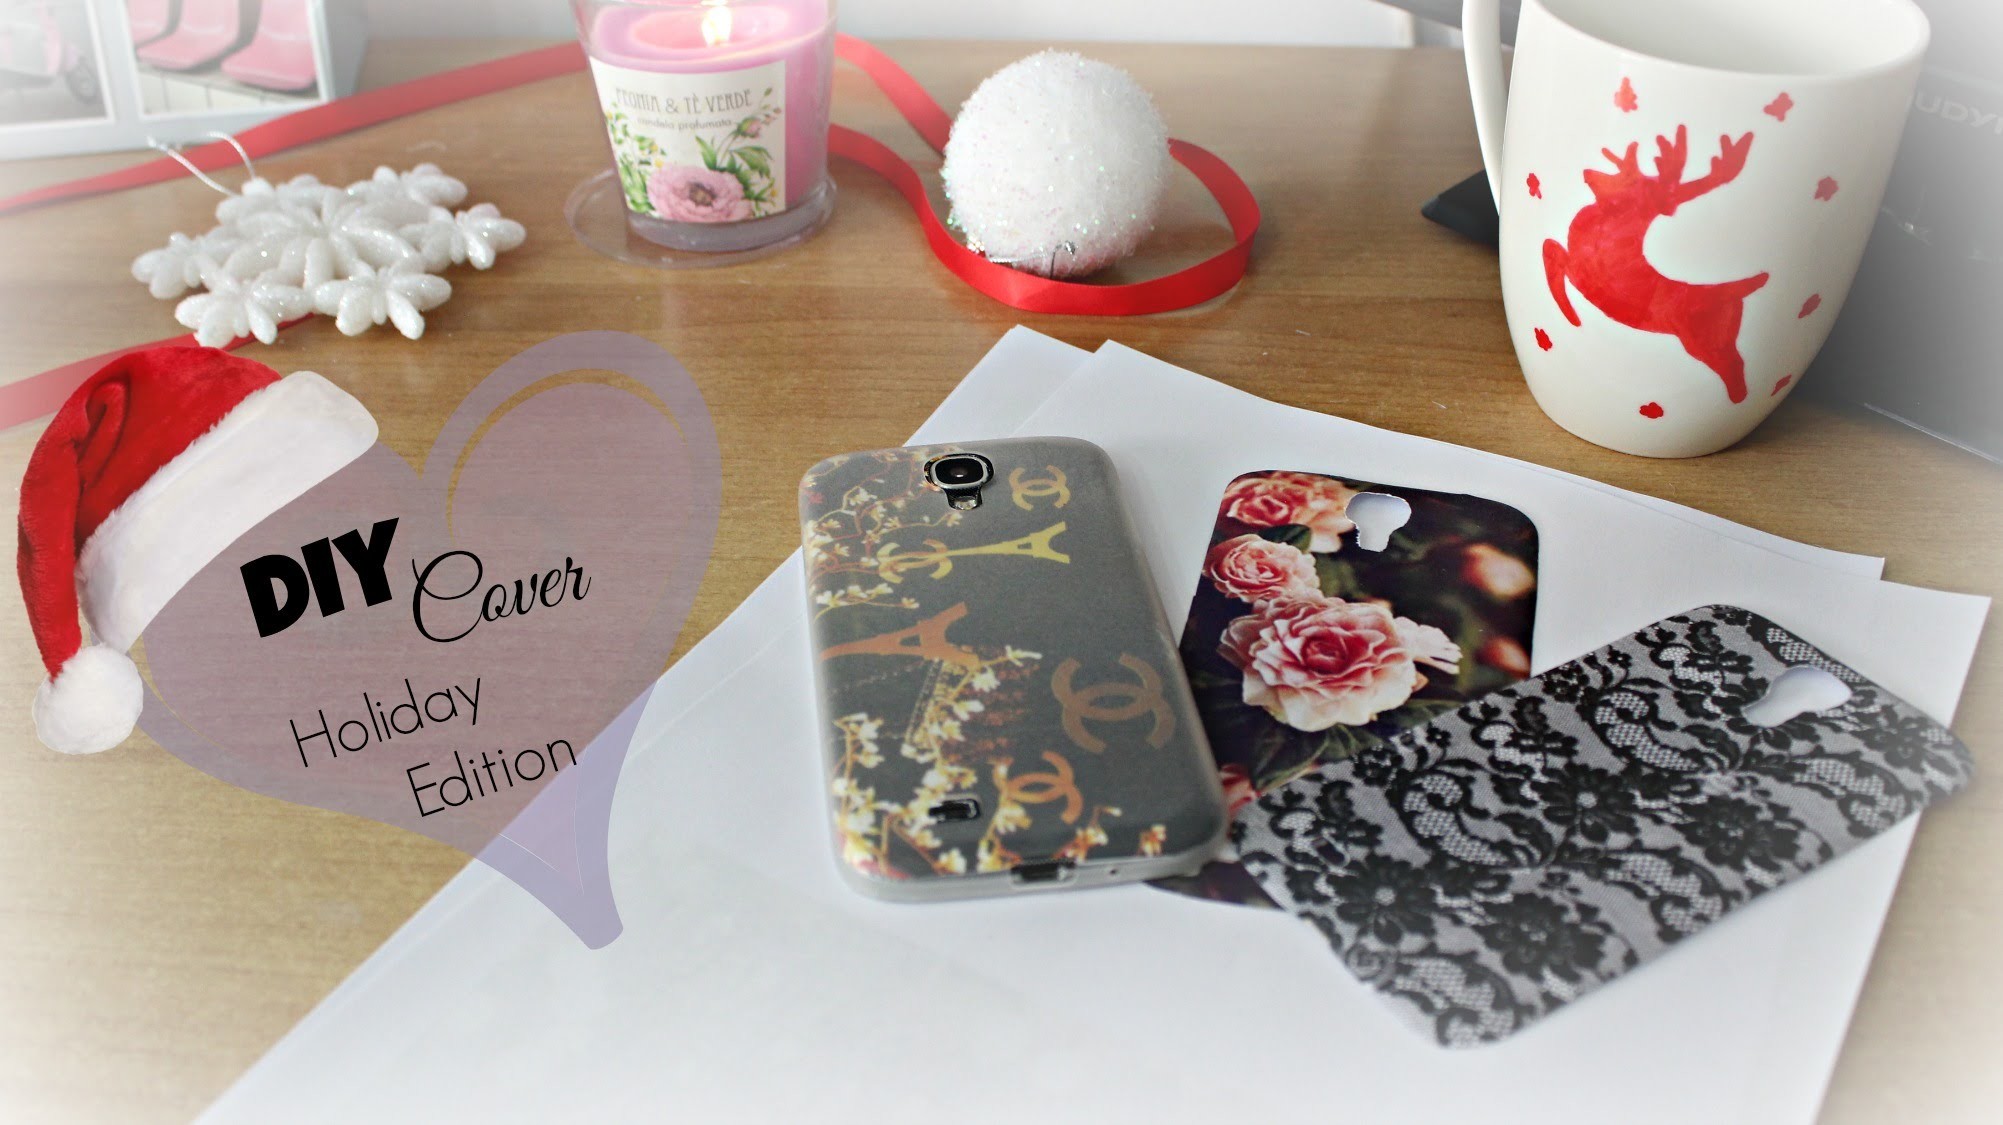 DIY Cell Phone Case ❅ Holidays Edition